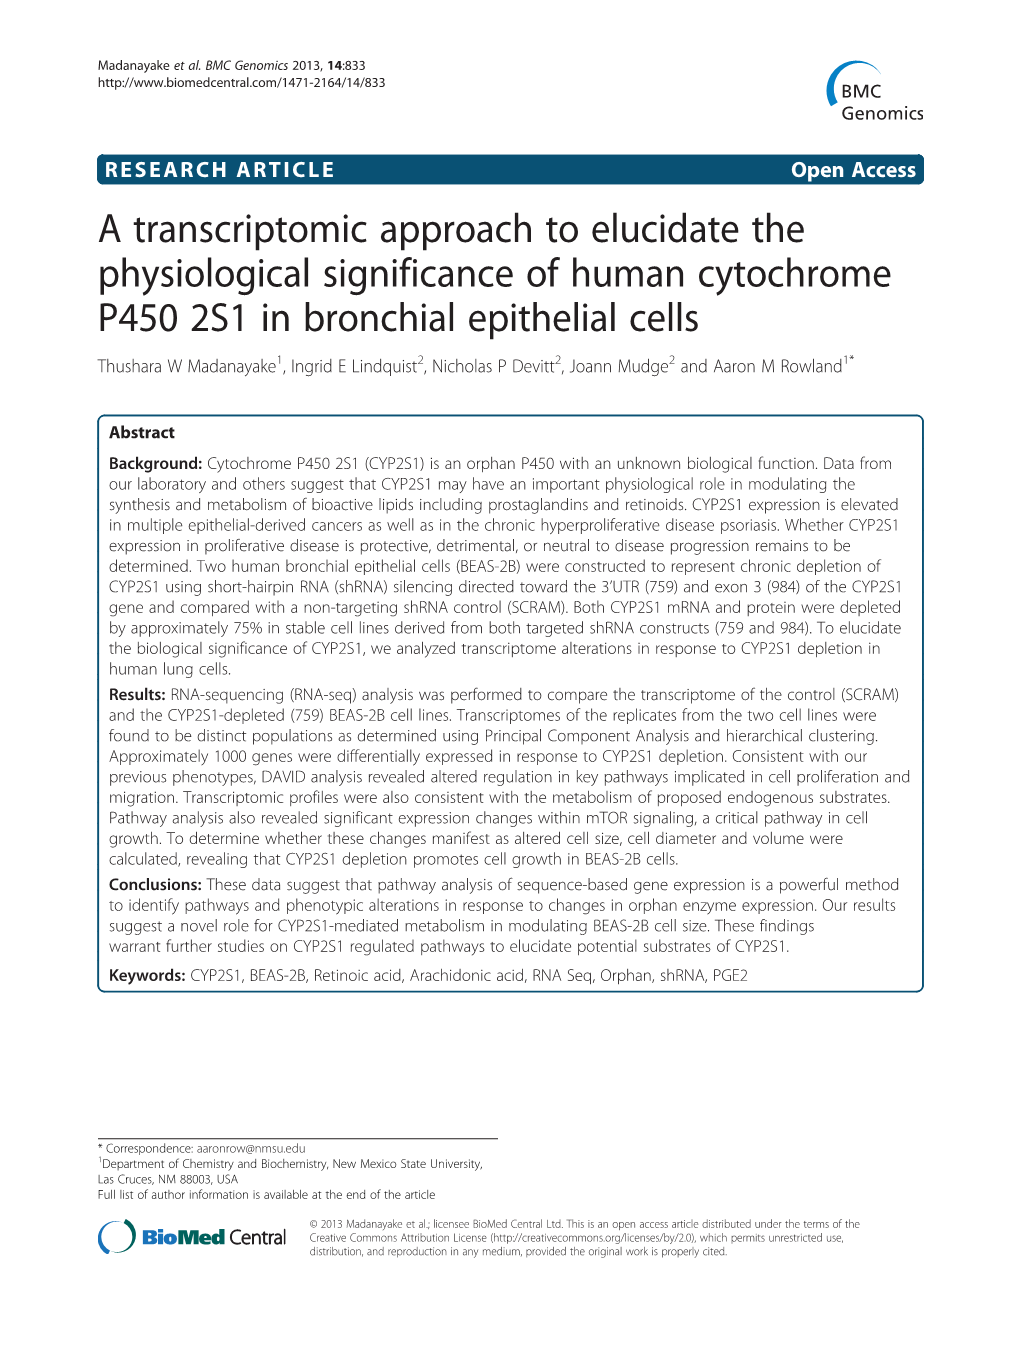 A Transcriptomic Approach to Elucidate the Physiological Significance Of